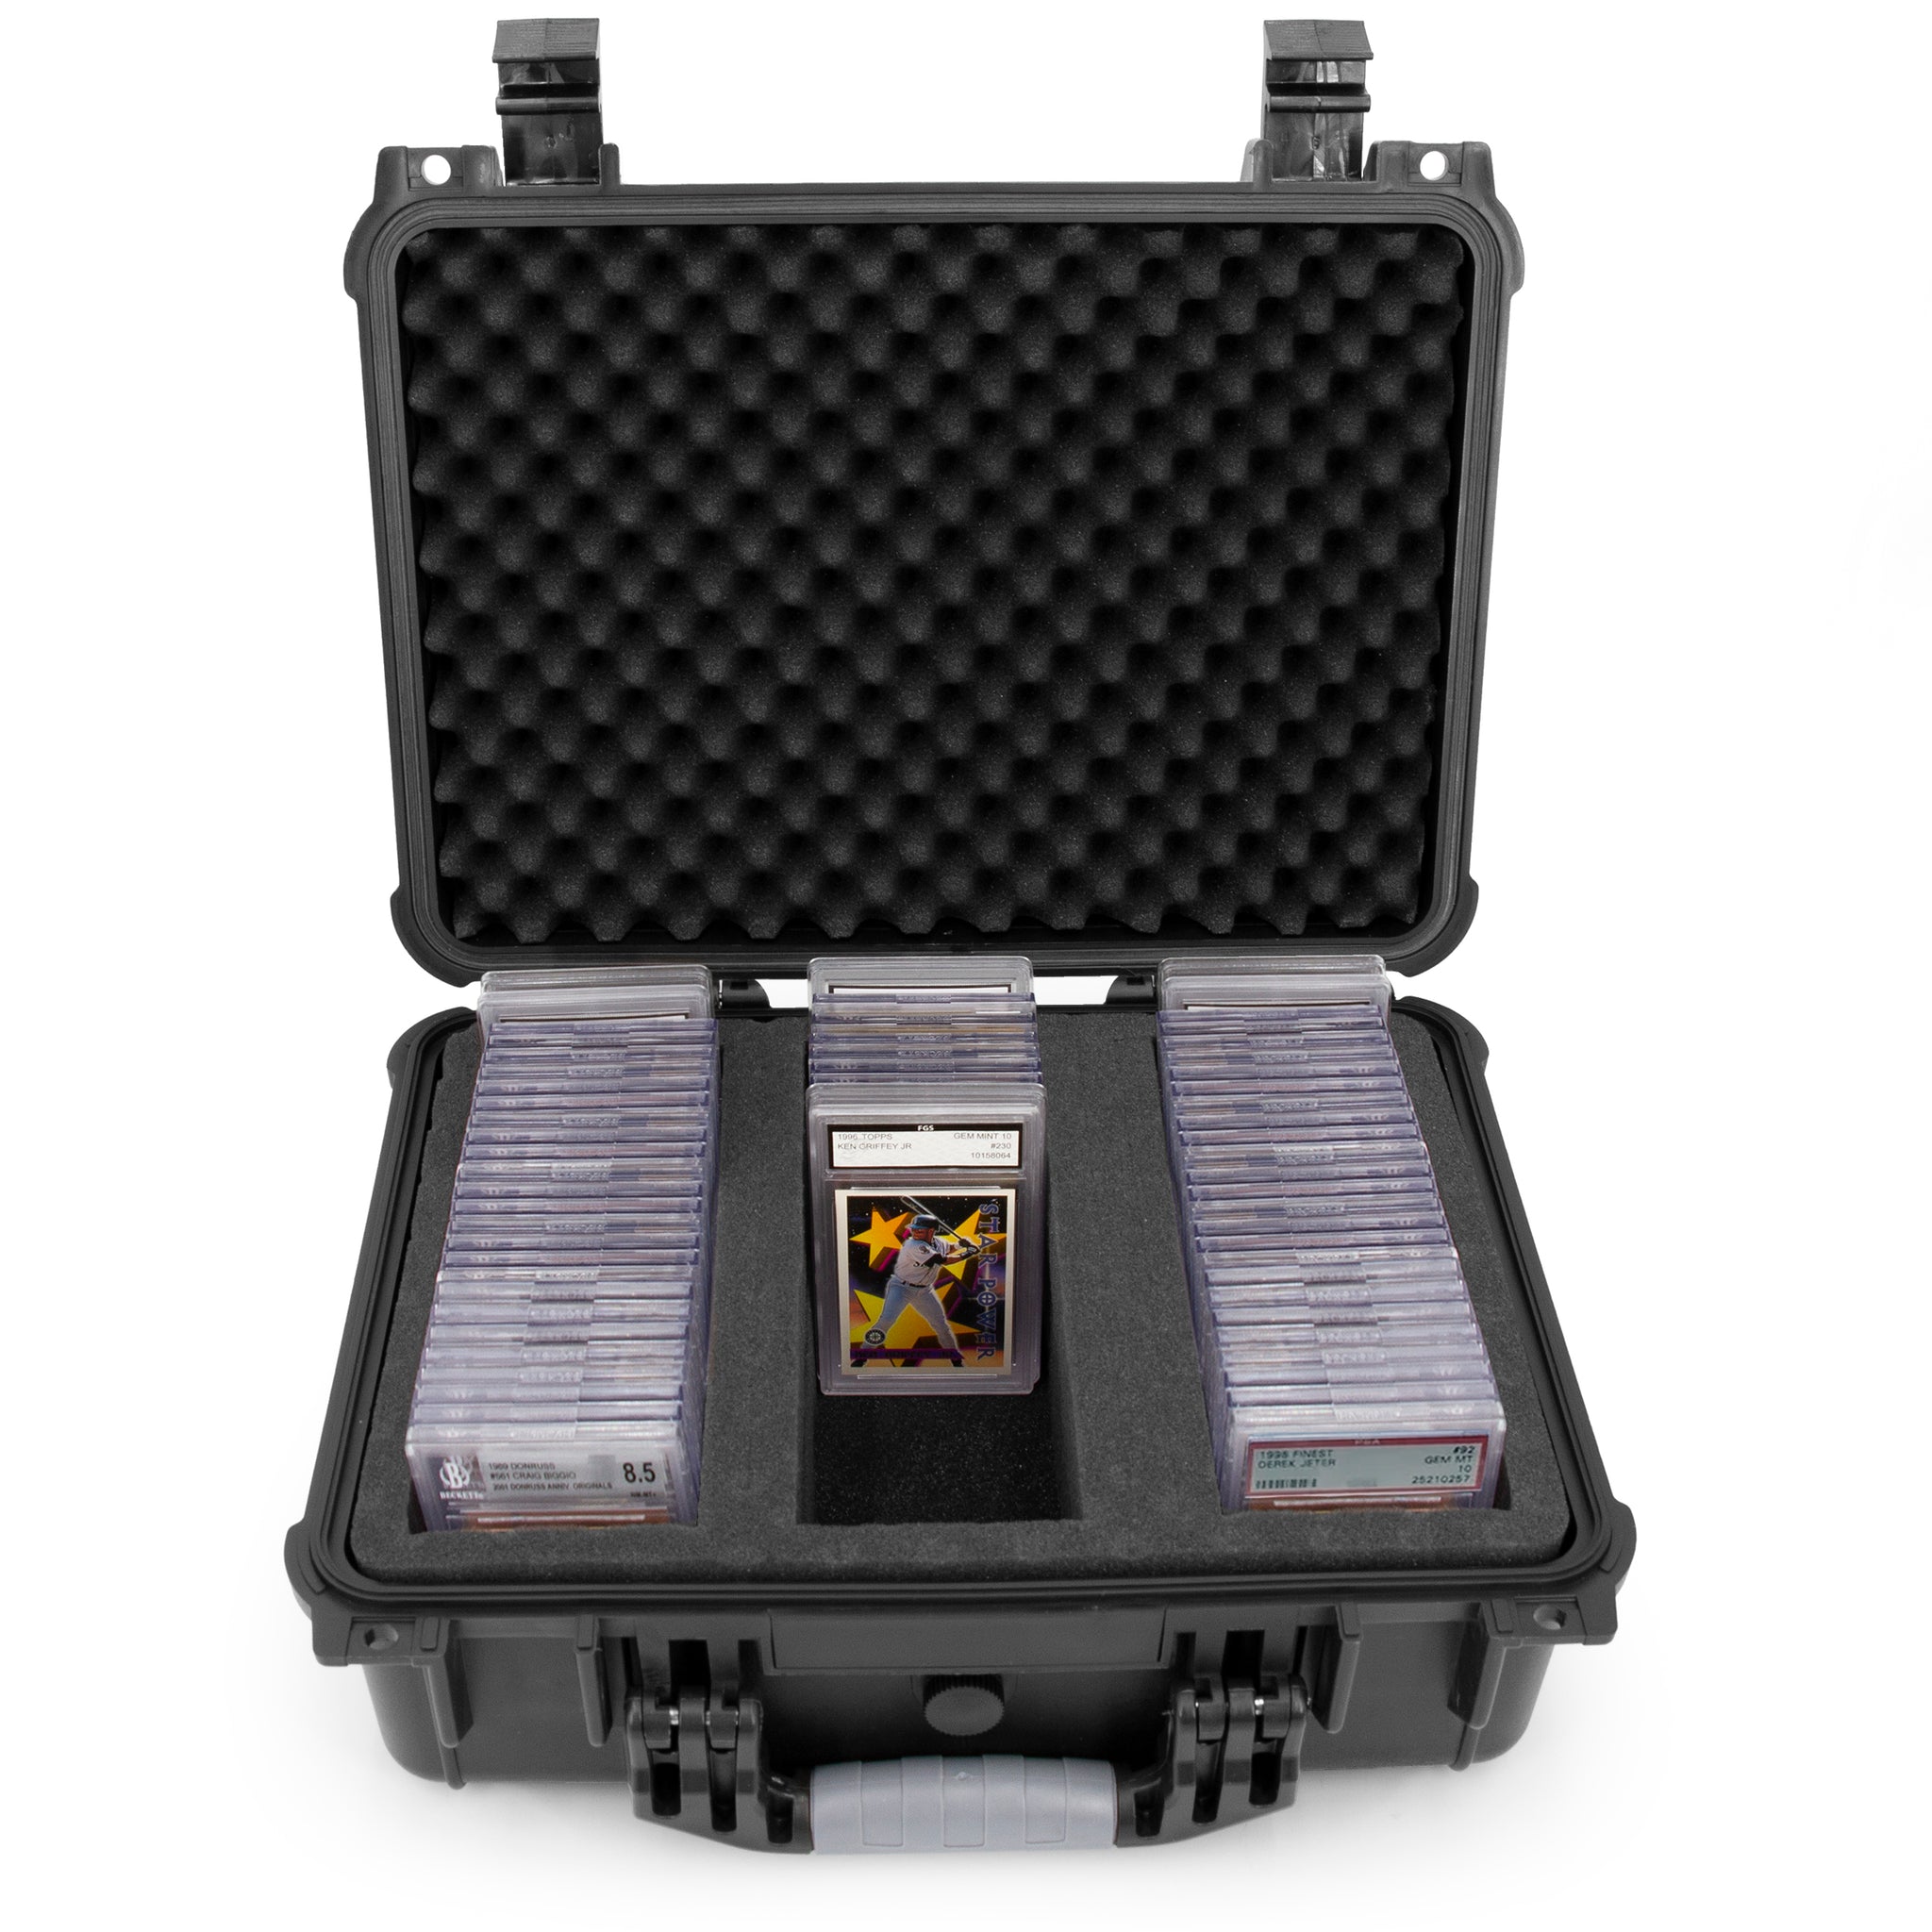 CASEMATIX Graded Card Carrying Case - Storage Box Trading Card Case  Compatible With 9 BGS PSA Graded Sports Card Slabs and More Graded Card  Sleeves